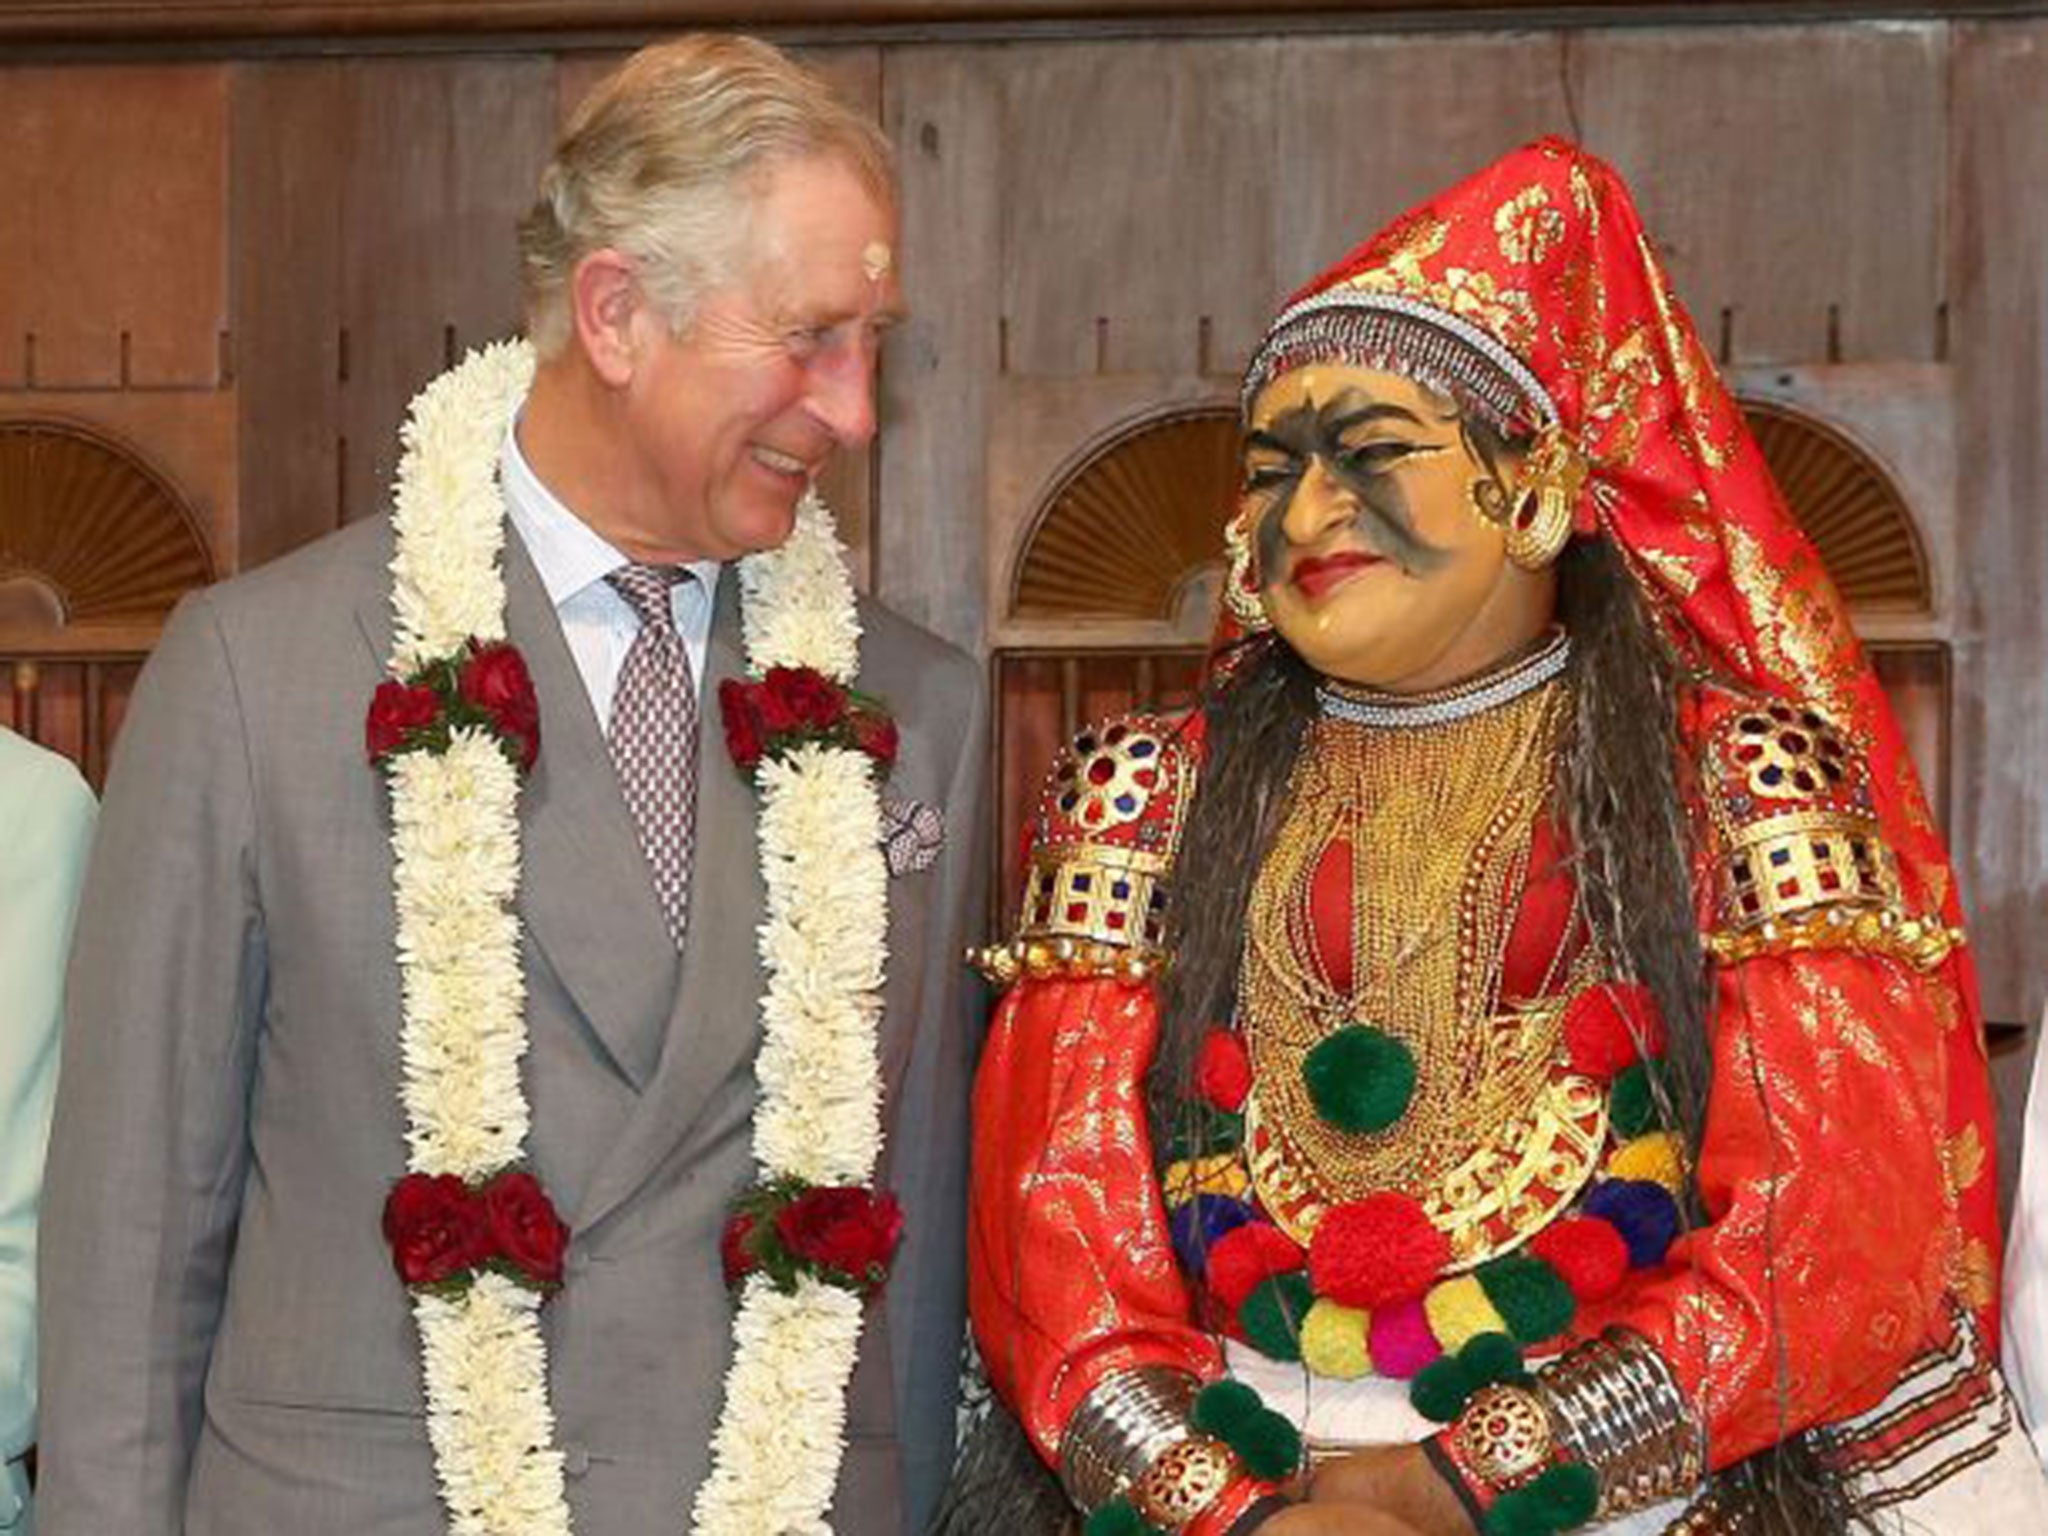 Prince Charles’s visit to India cost £434,000